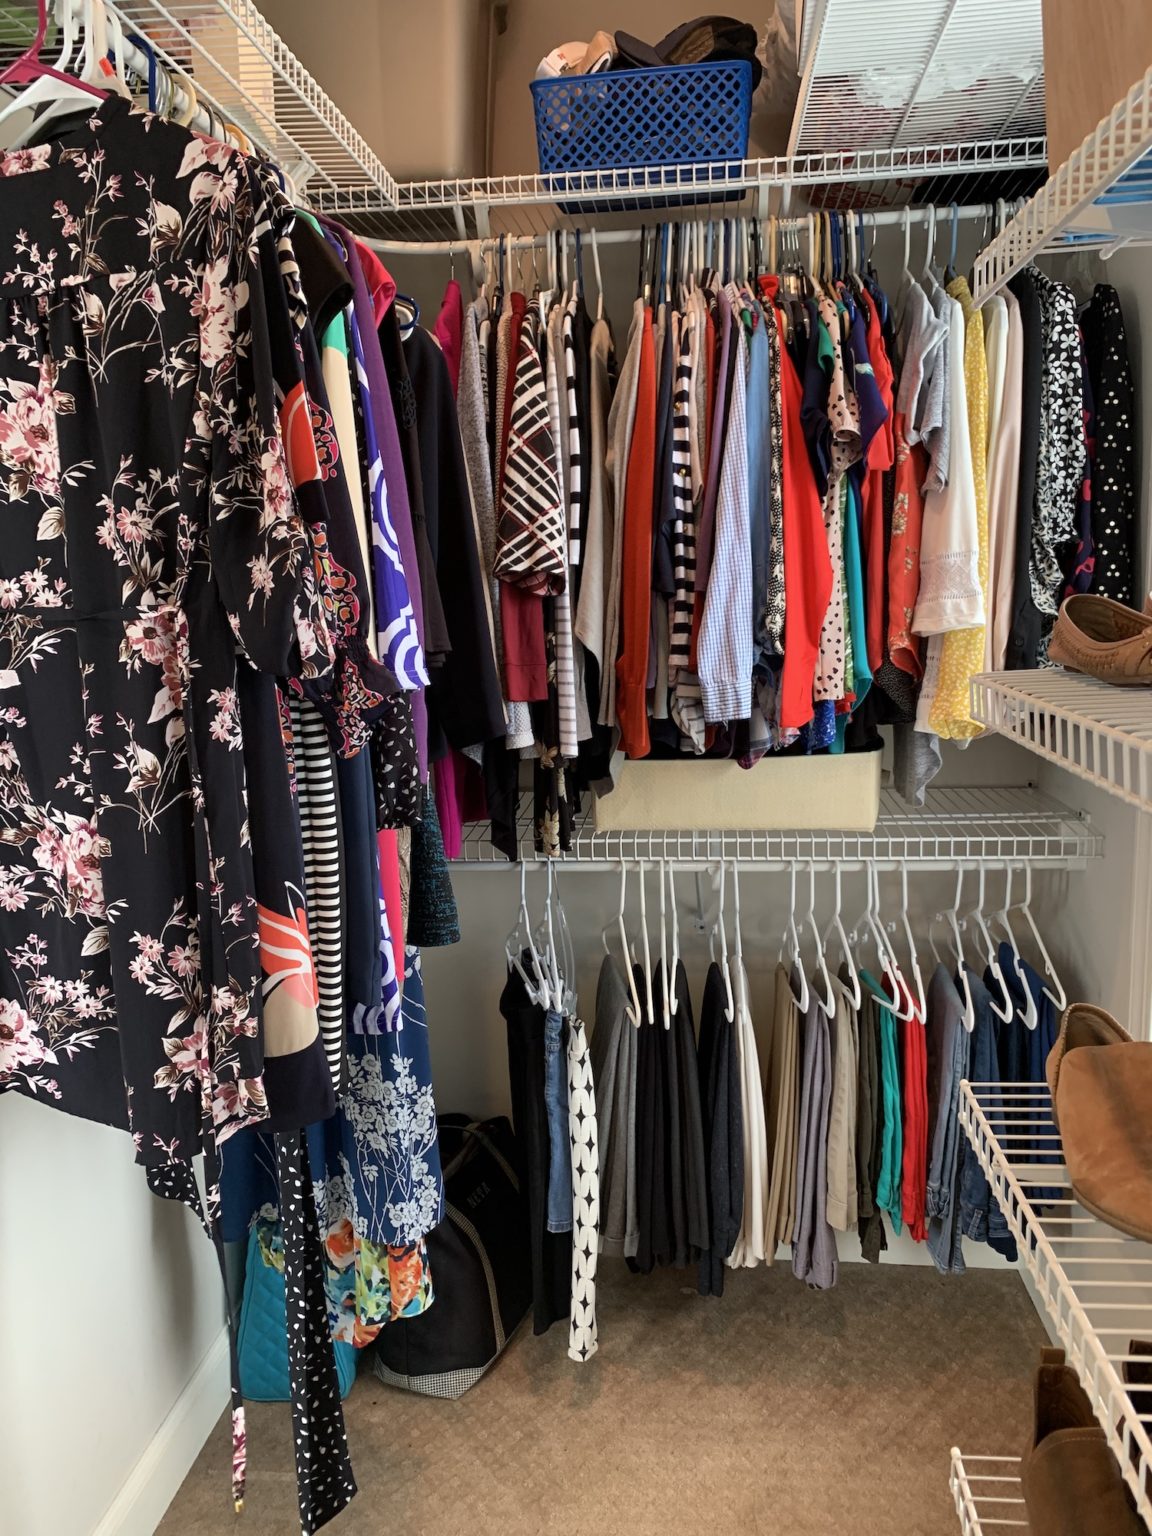 The One Thing You Must Do when KonMari'ing Your Clothing